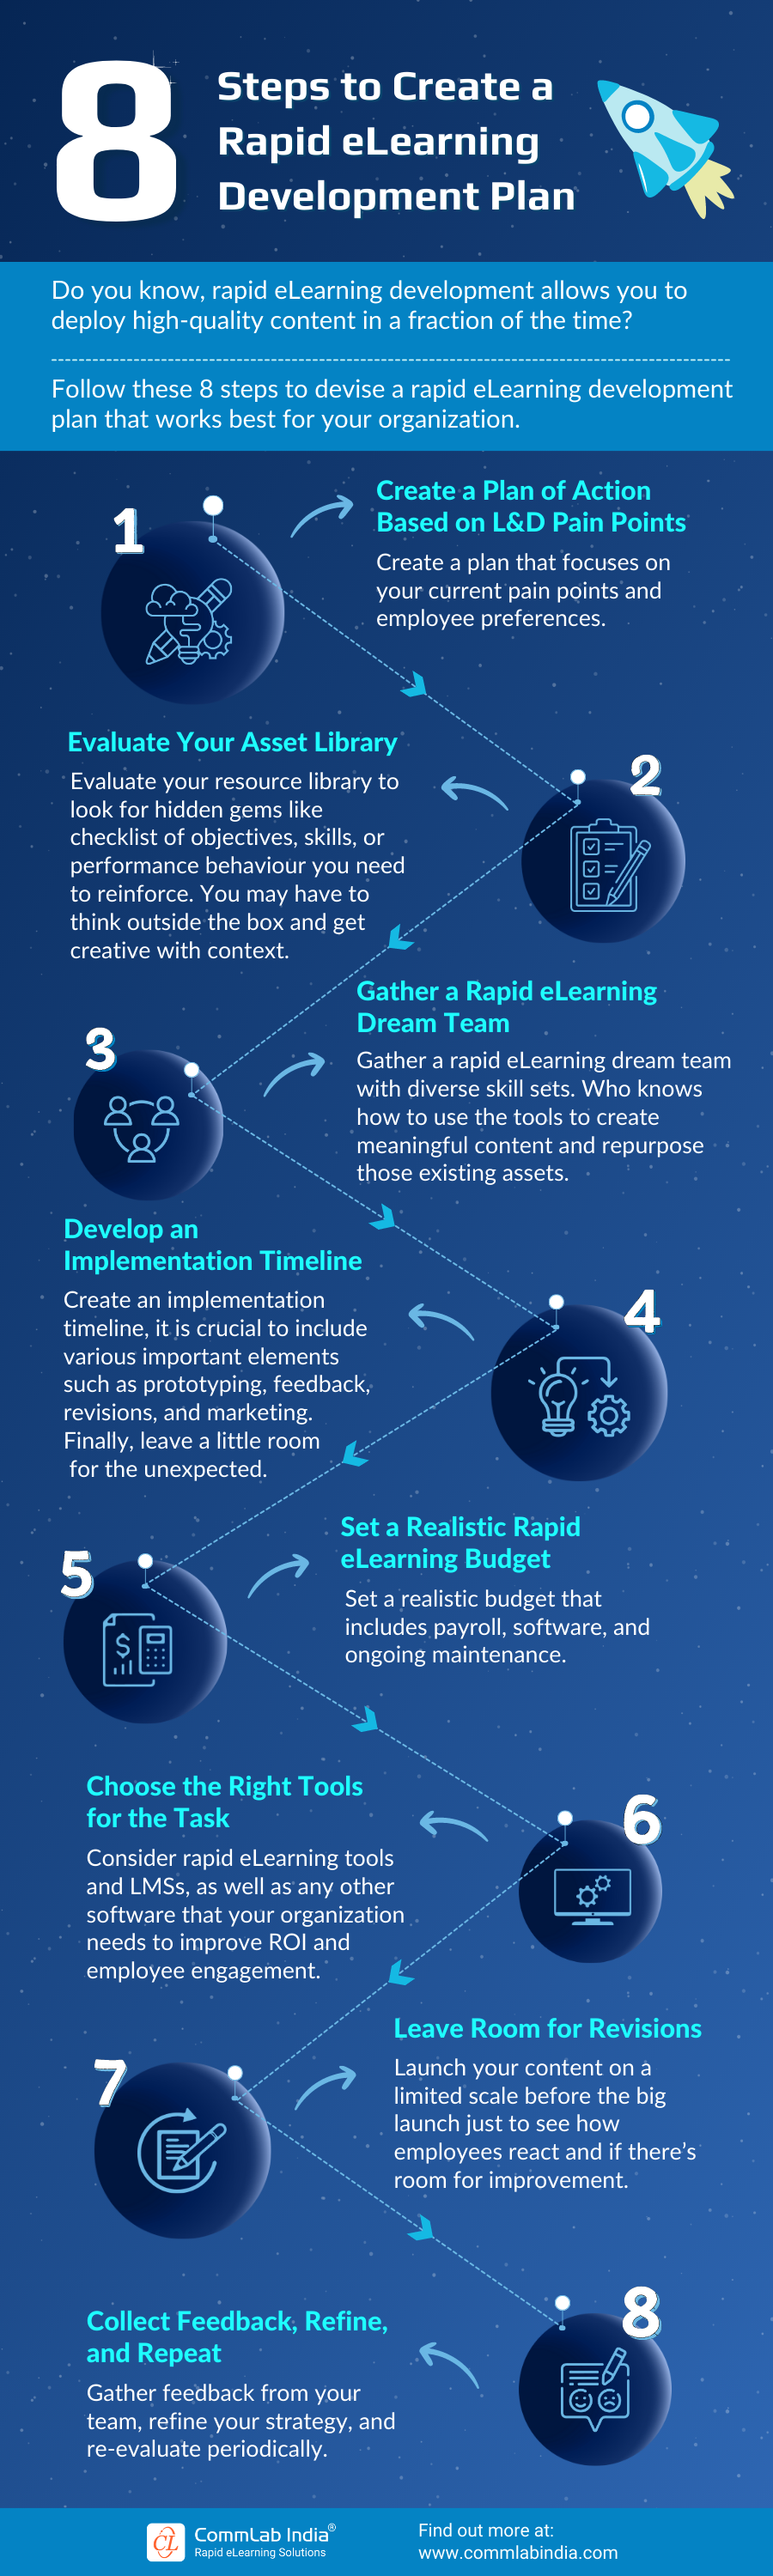 Rapid eLearning: 8 Steps to Create a Development Plan [Infographic]